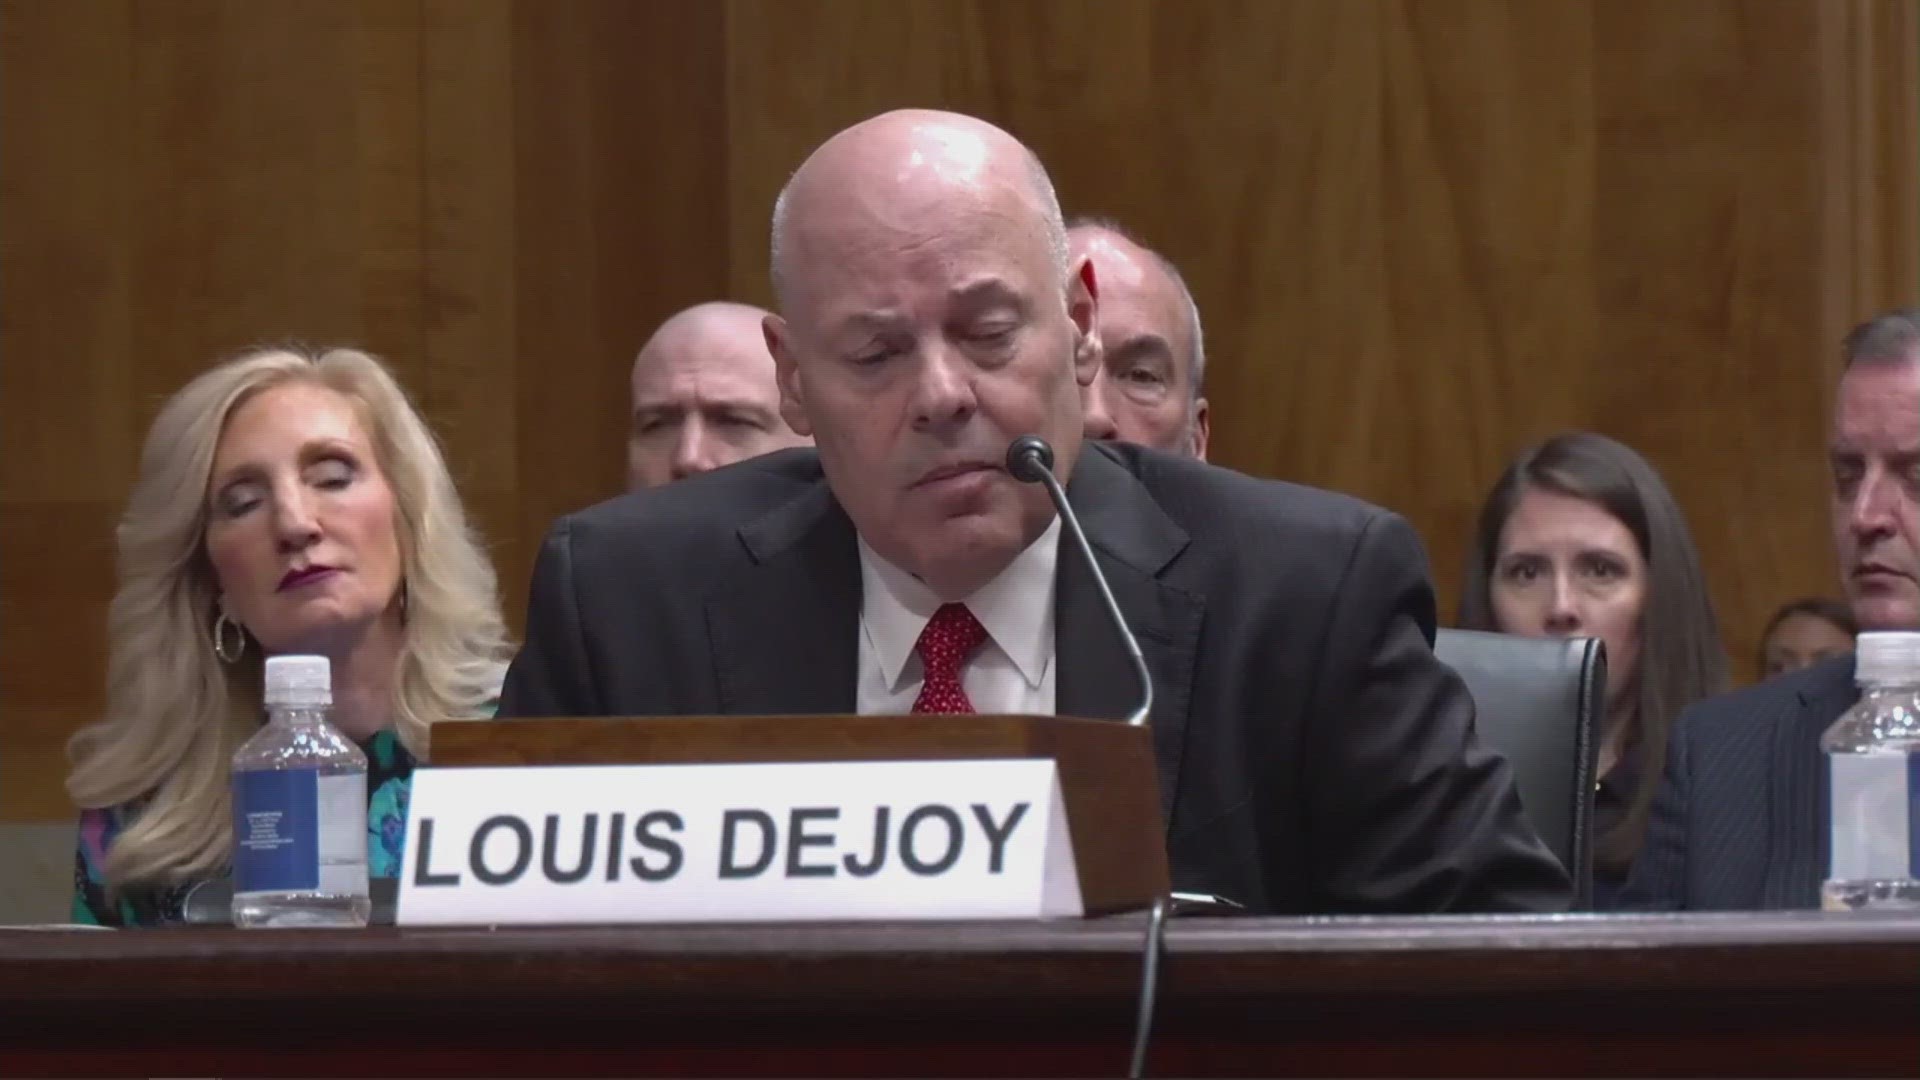 Louis DeJoy answered questions at a Senate hearing on Tuesday regarding ongoing issues at multiple postal facilities, including in Atlanta.